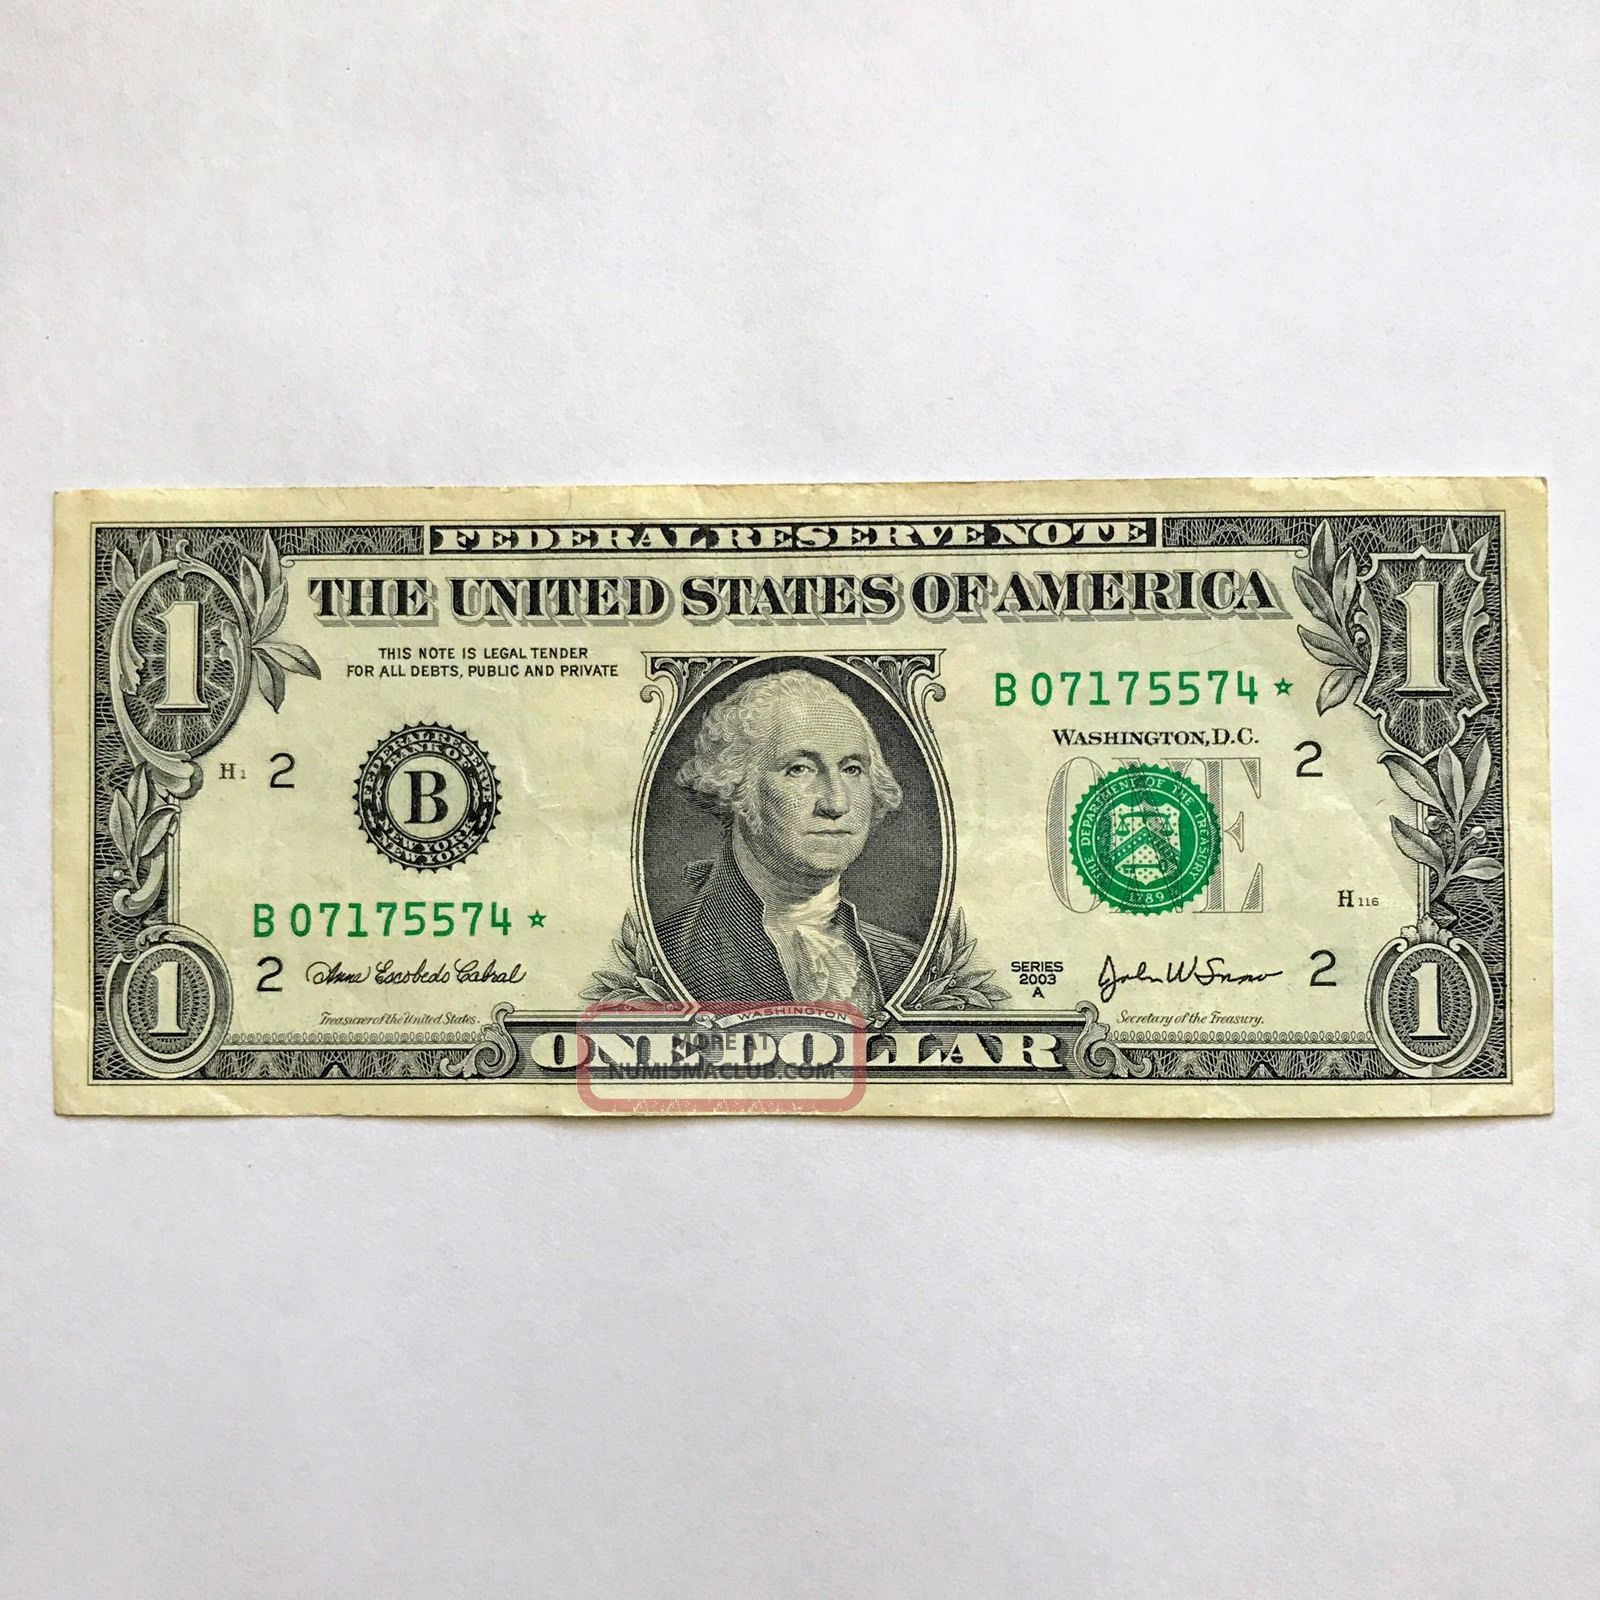 Star 2003 - A $1 Dollar Bill Low Serial B07175574 Ny Federal Reserve Note Small Size Notes photo